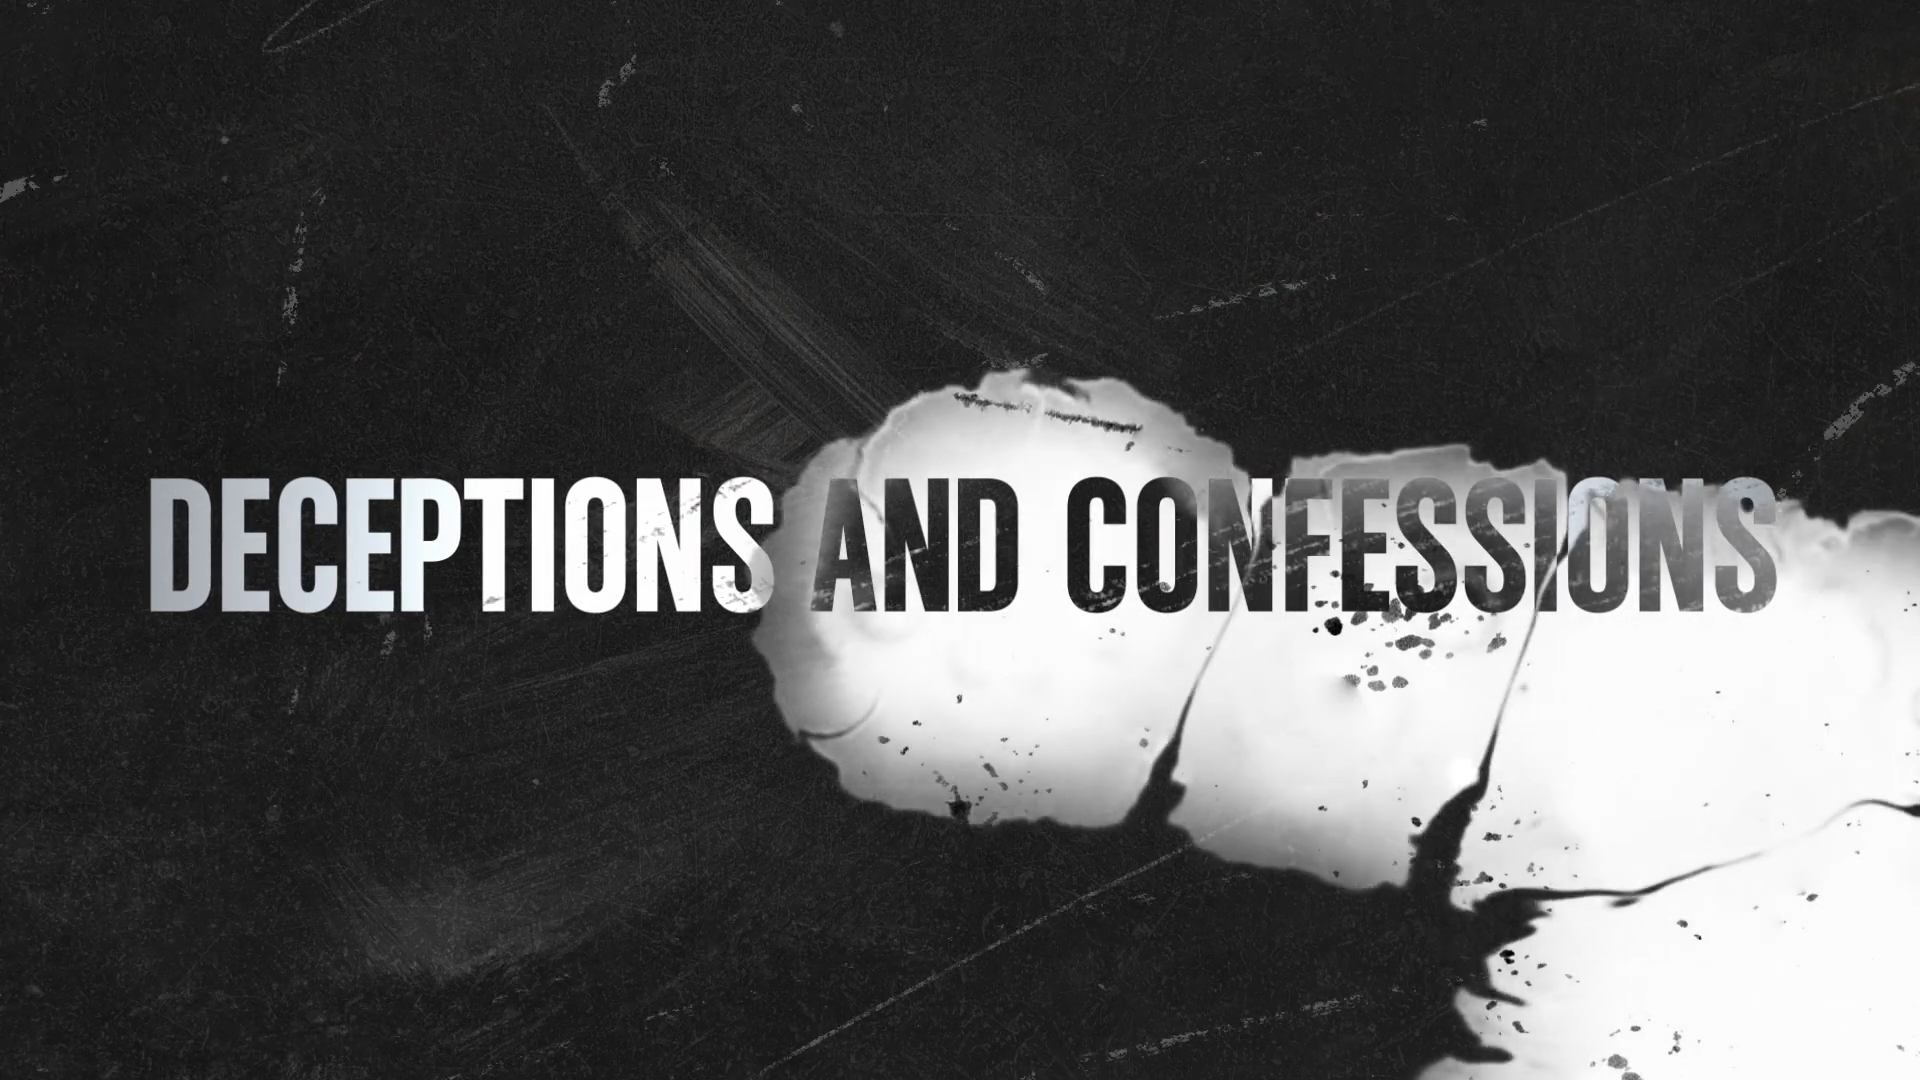 Deceptions-and-Confessions-01